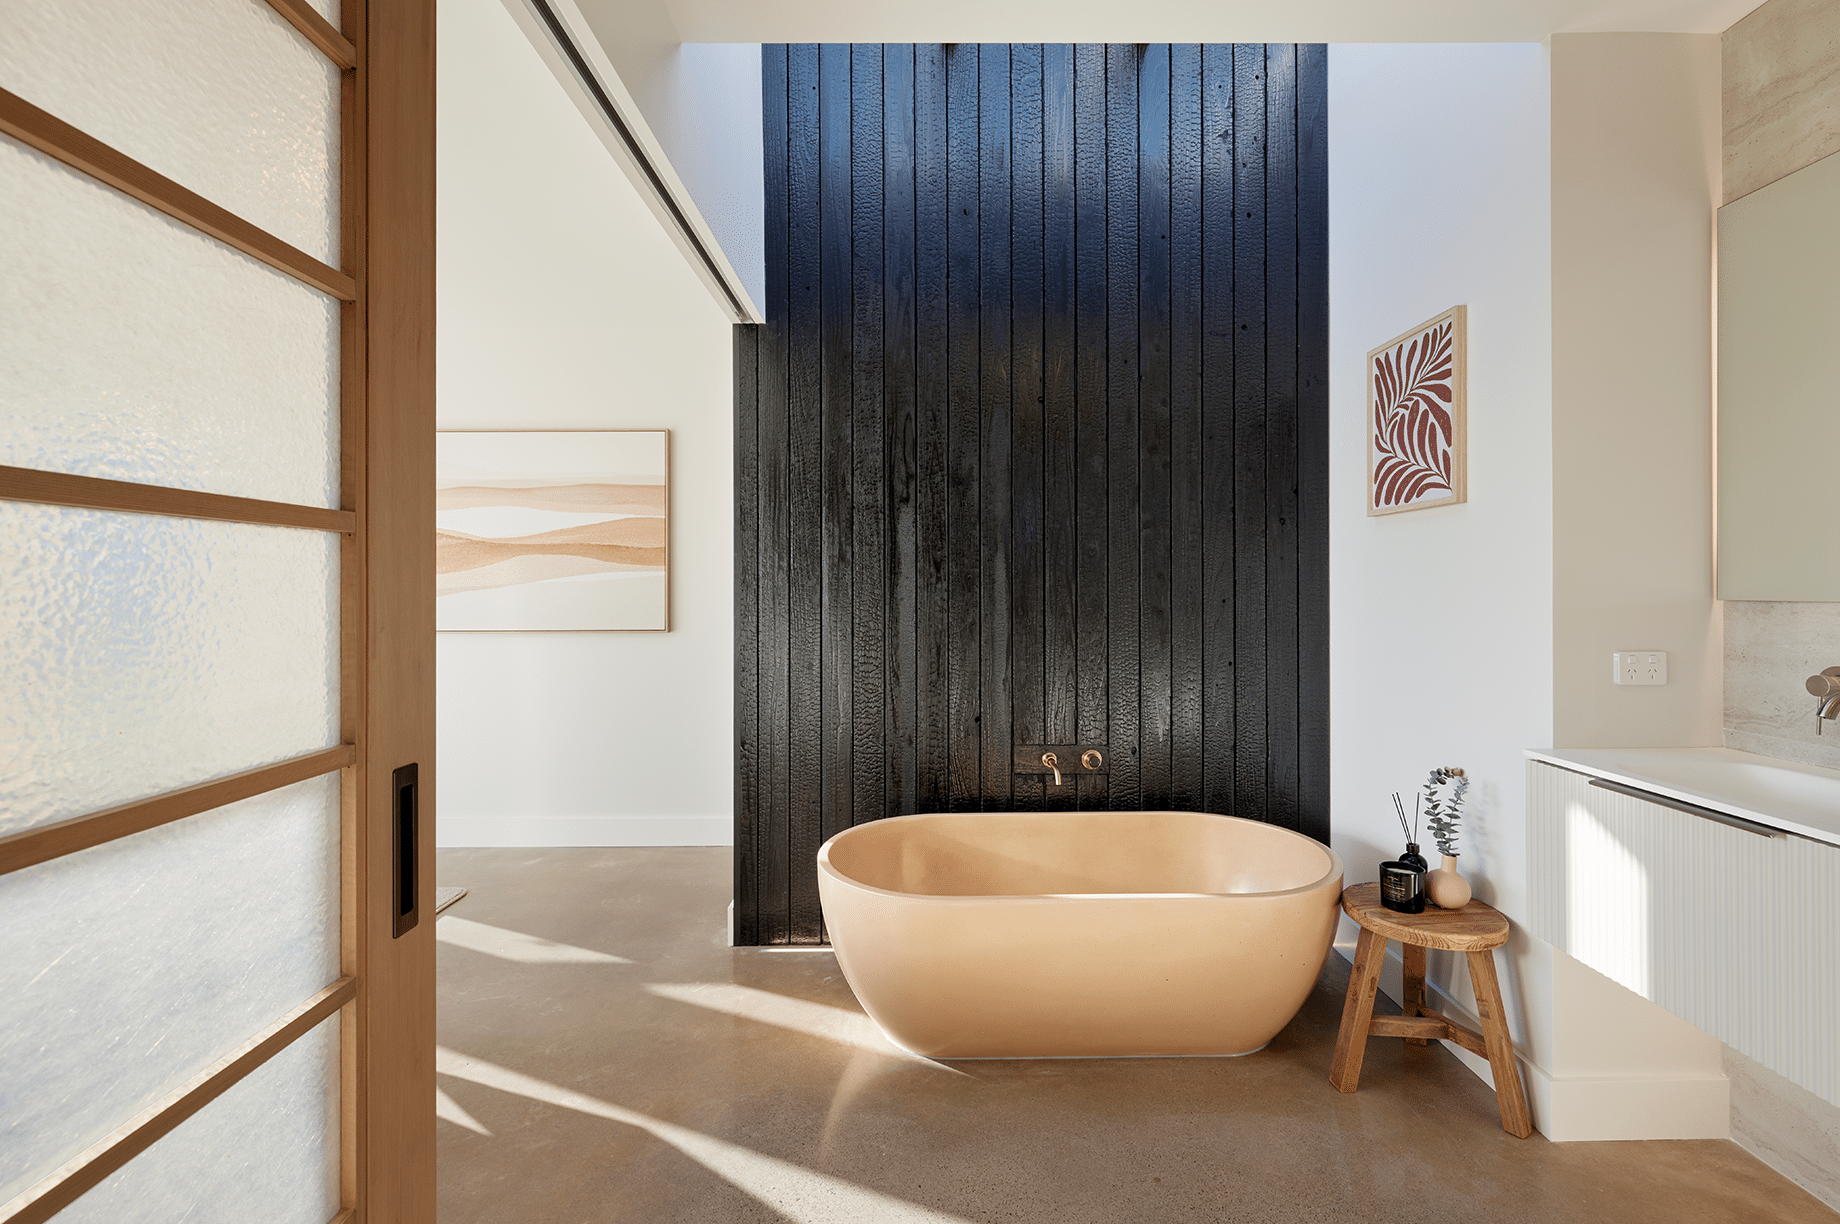 Large bathroom with black wooden panels and a beige bathtub